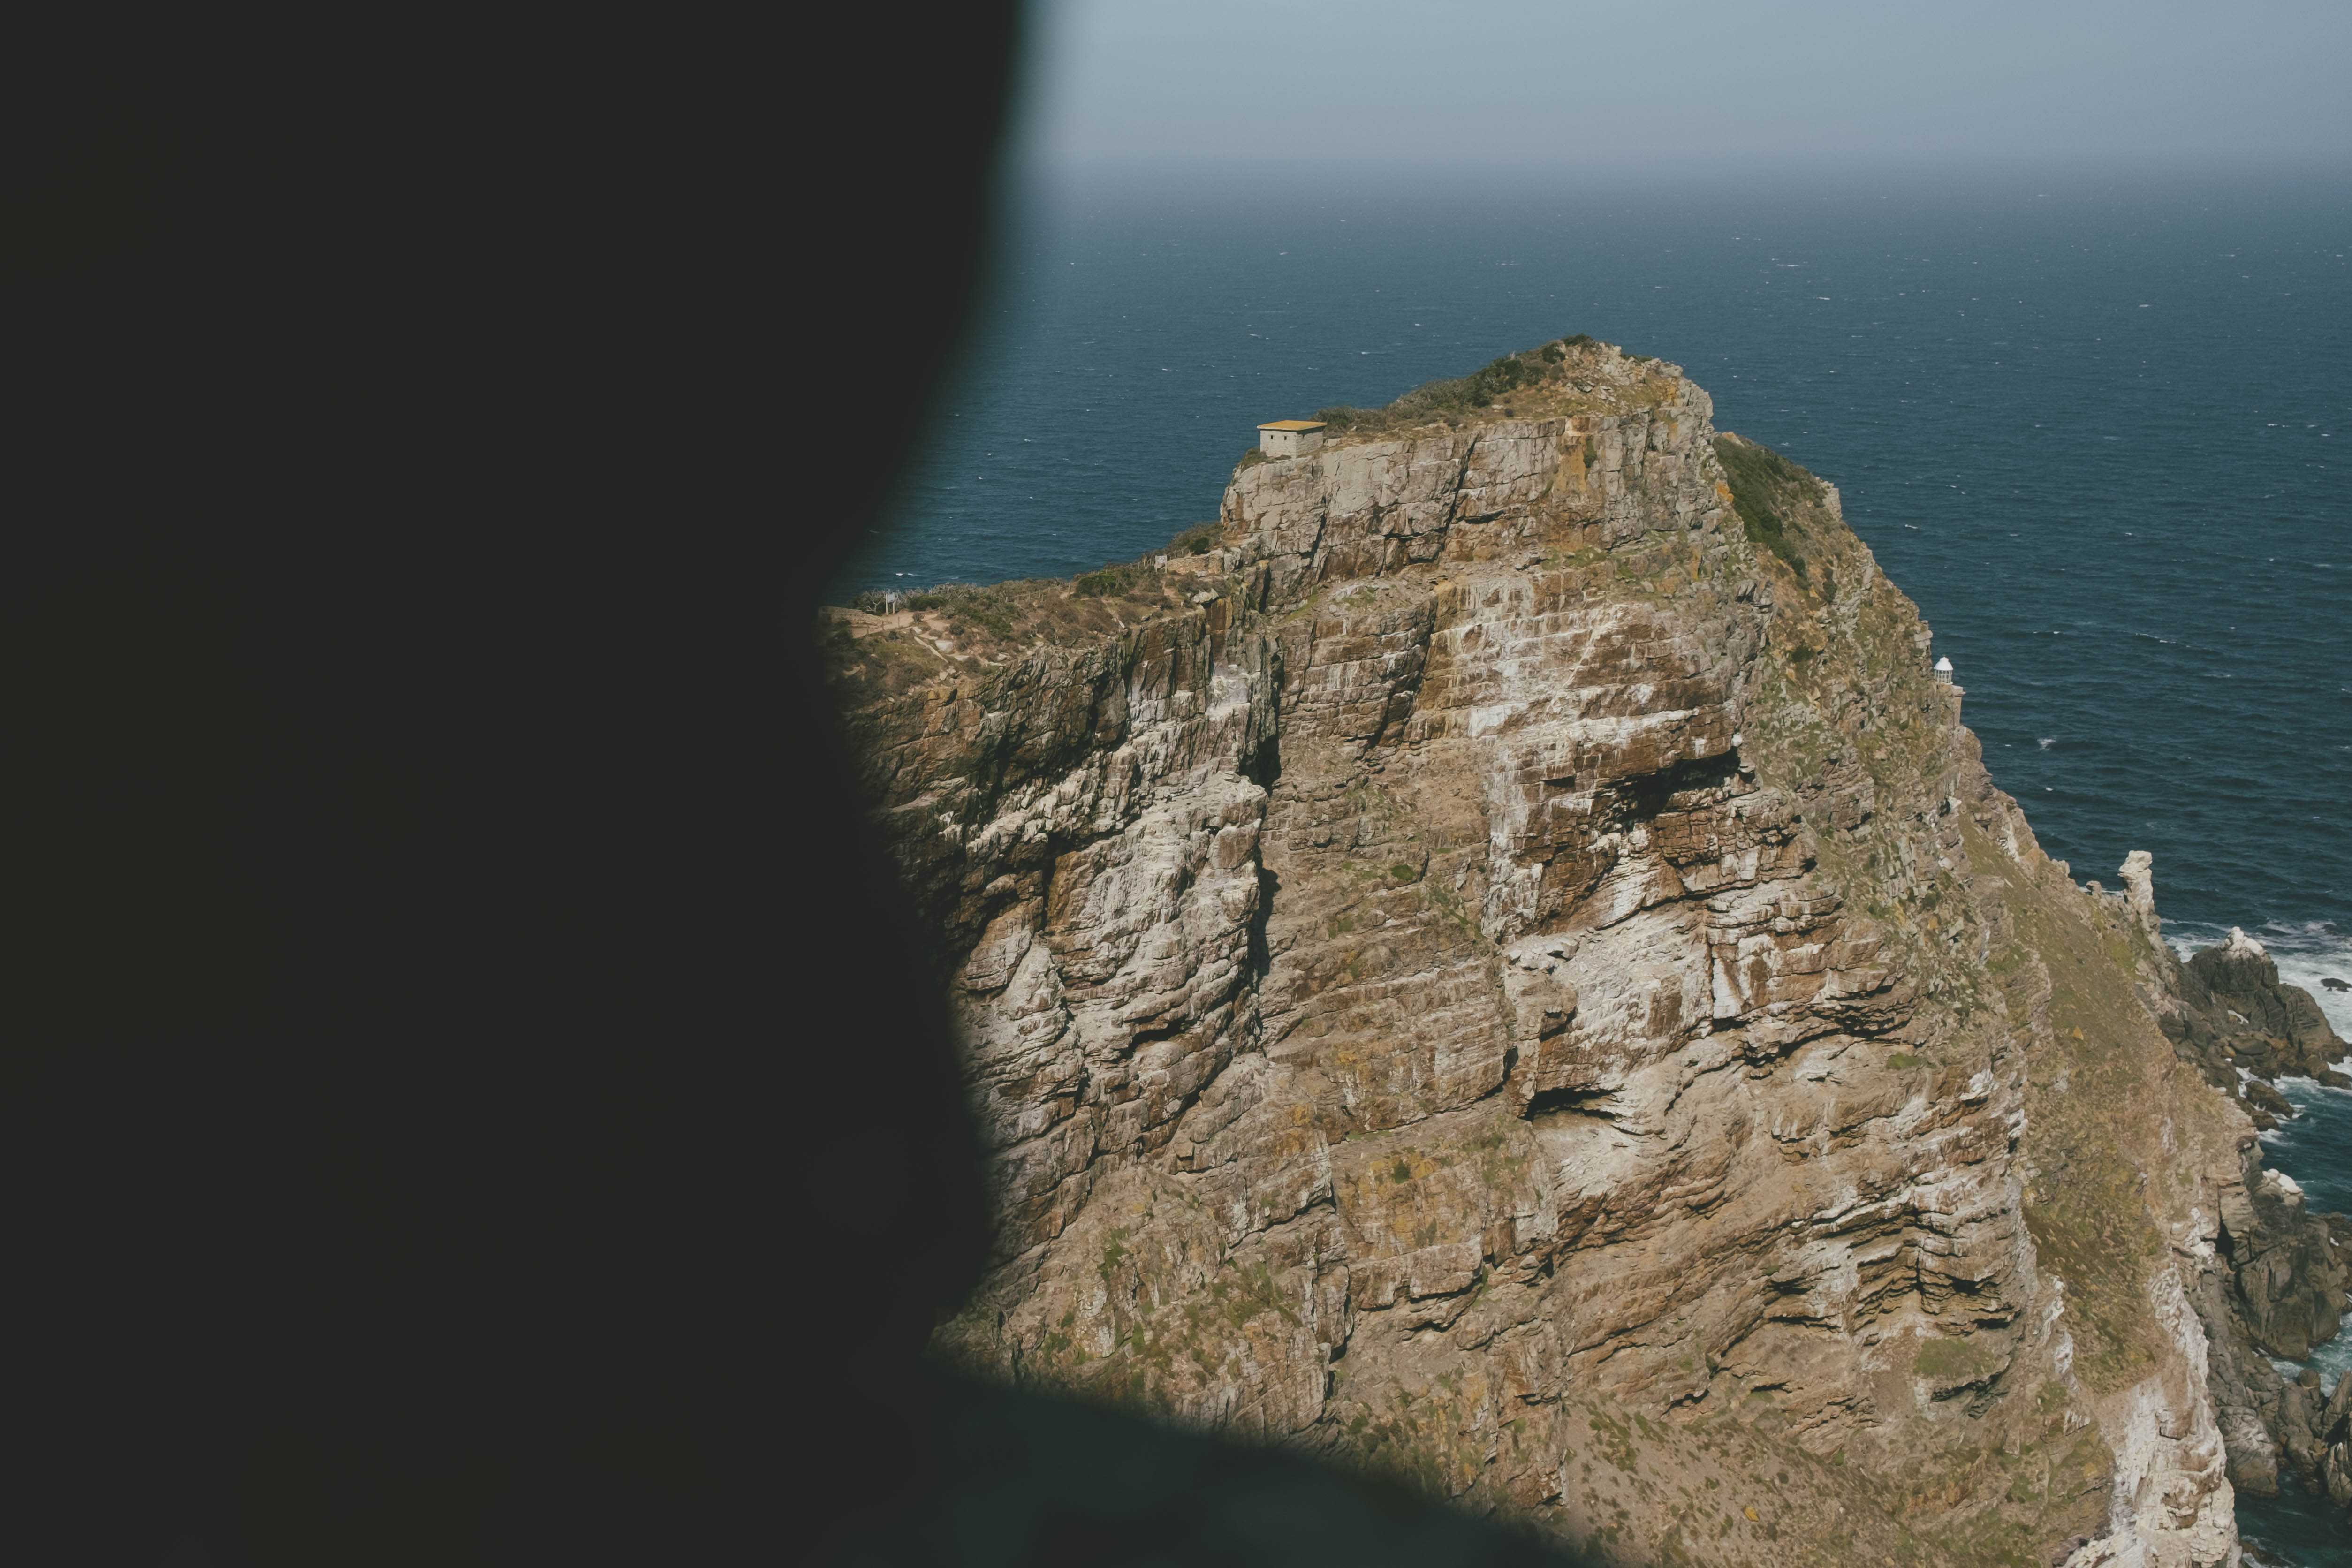 Cape Point, framed by the shadow of a nearby cliff